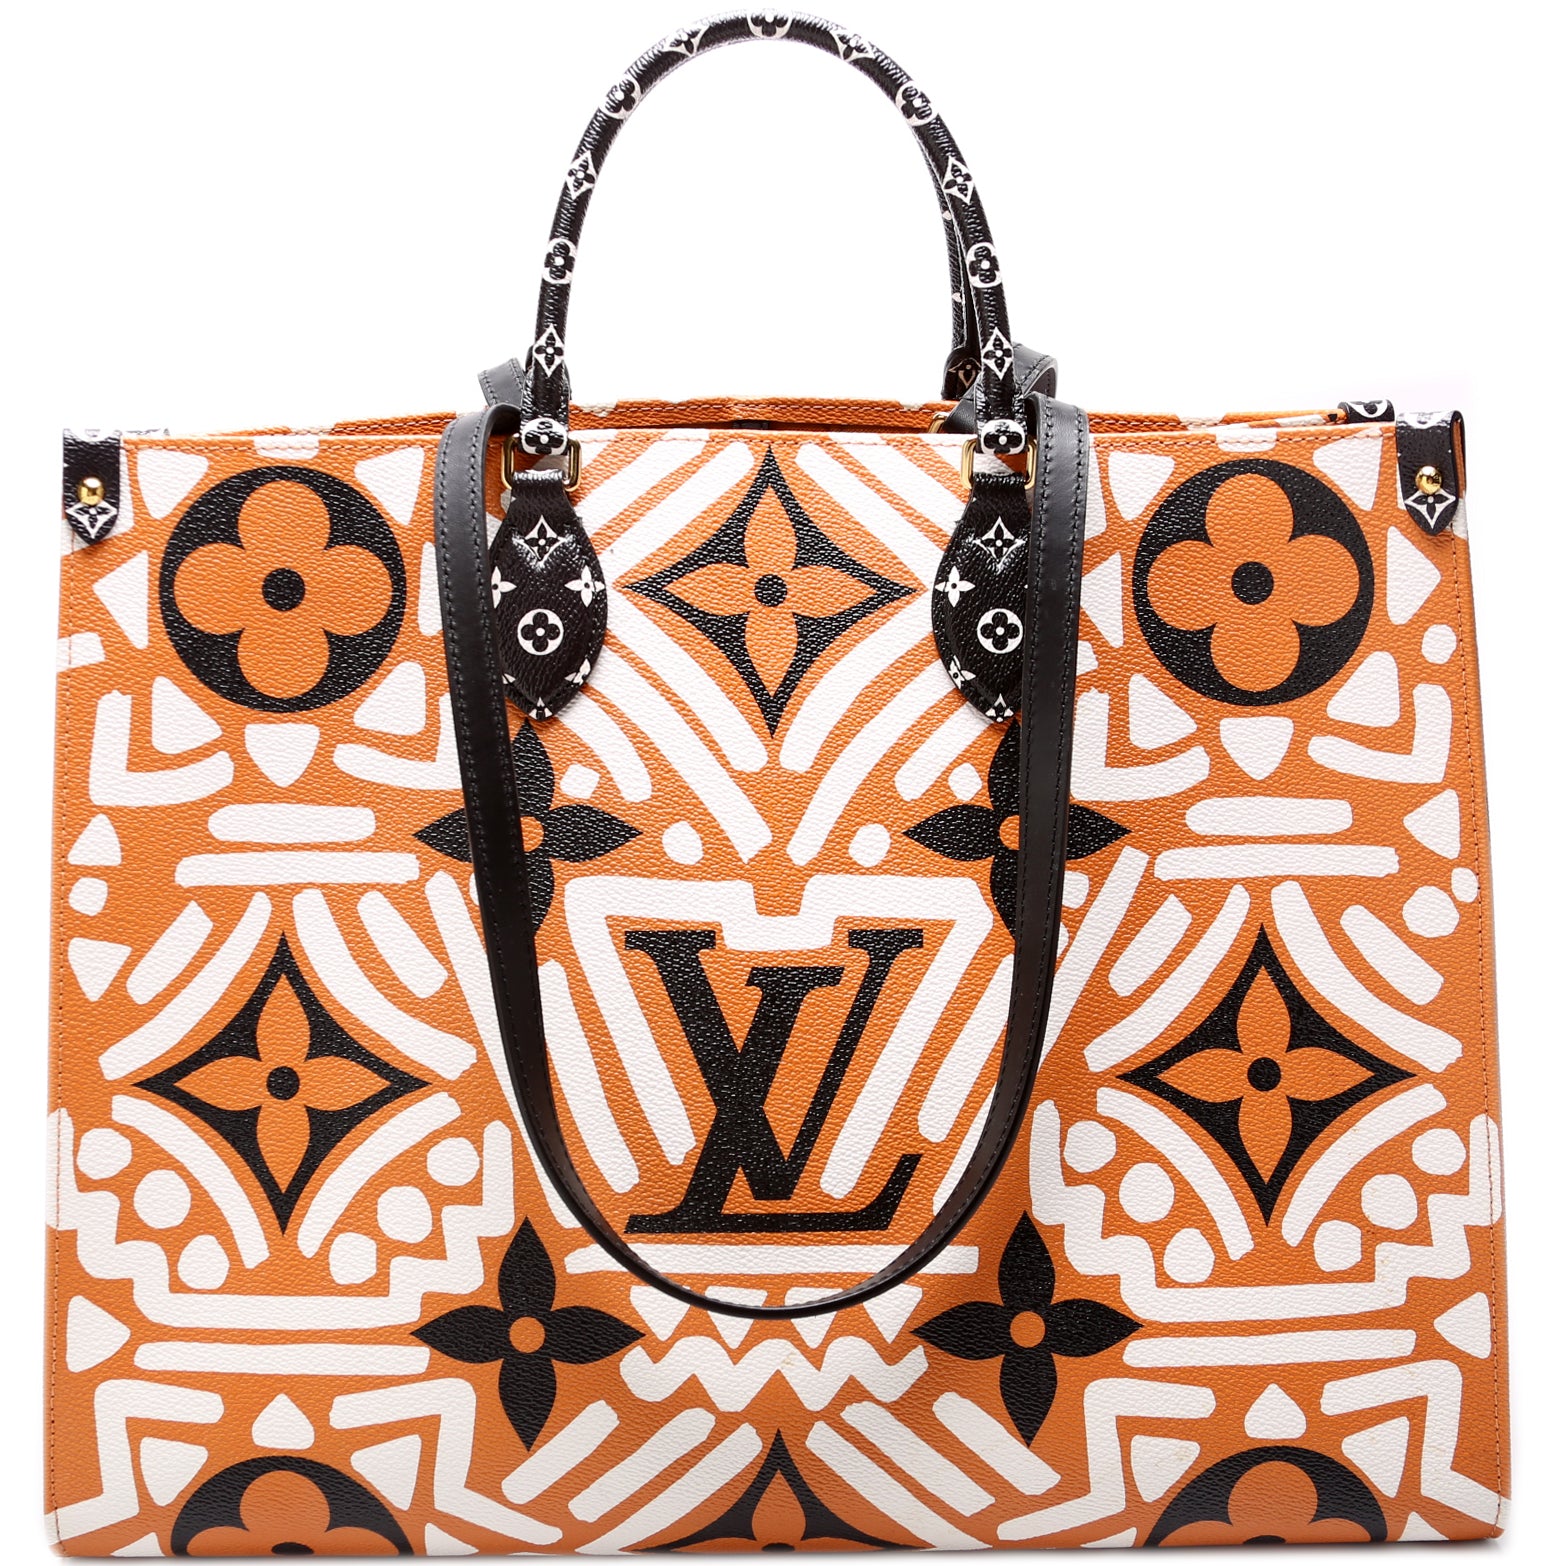 Louis Vuitton, Bags, Lv Crafty Onthego Gm